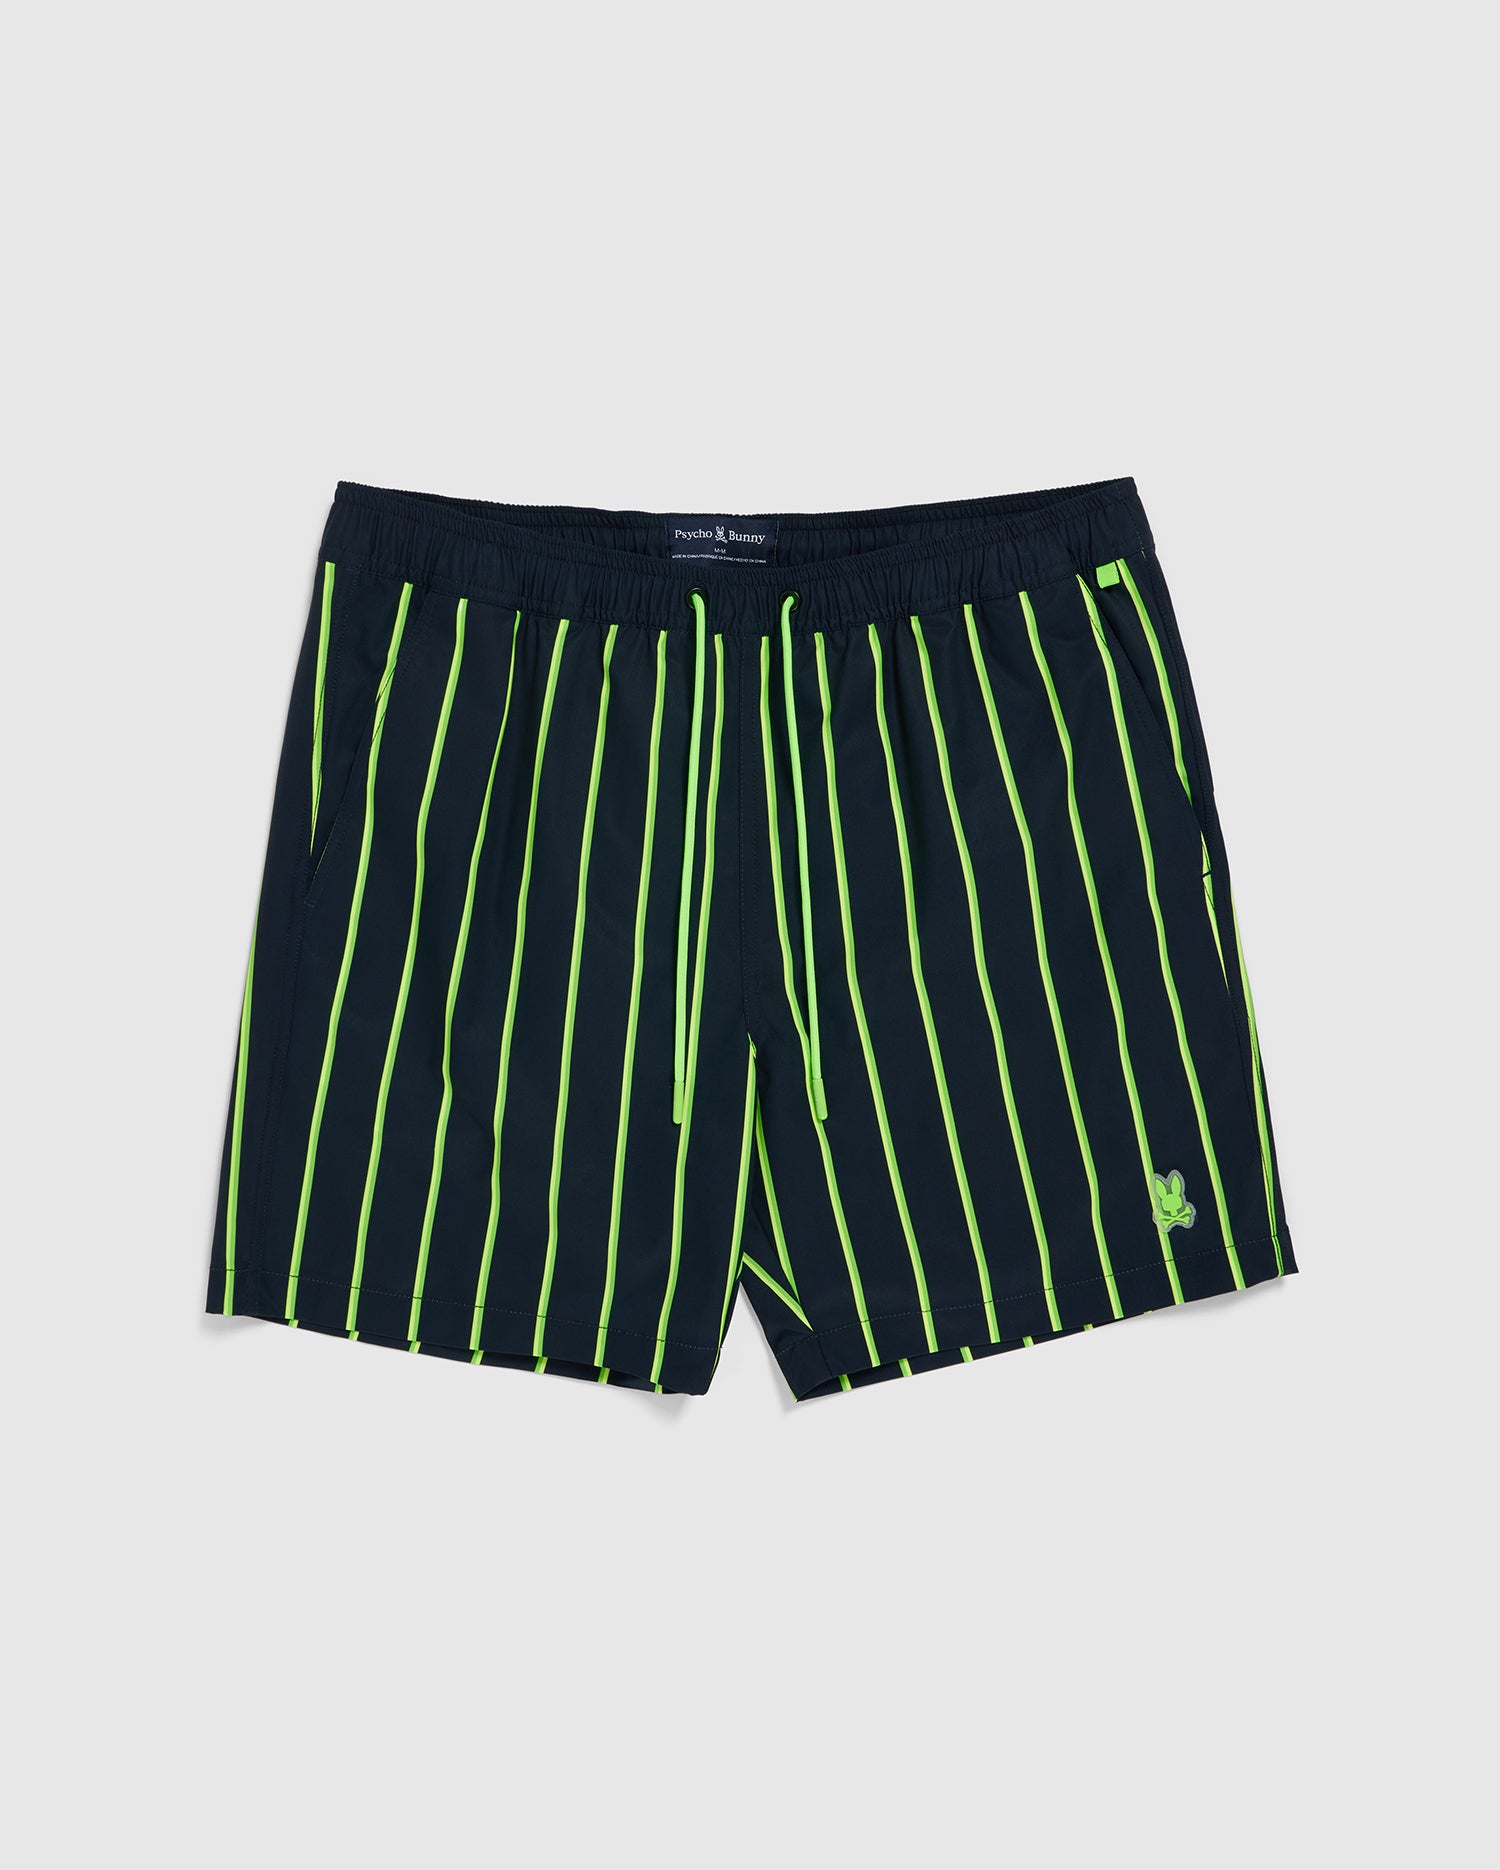 Men's Psycho Bunny Alton Stripe Swim Trunk in black with neon green vertical stripes and a small green logo on the lower left leg, displayed against a plain white background.